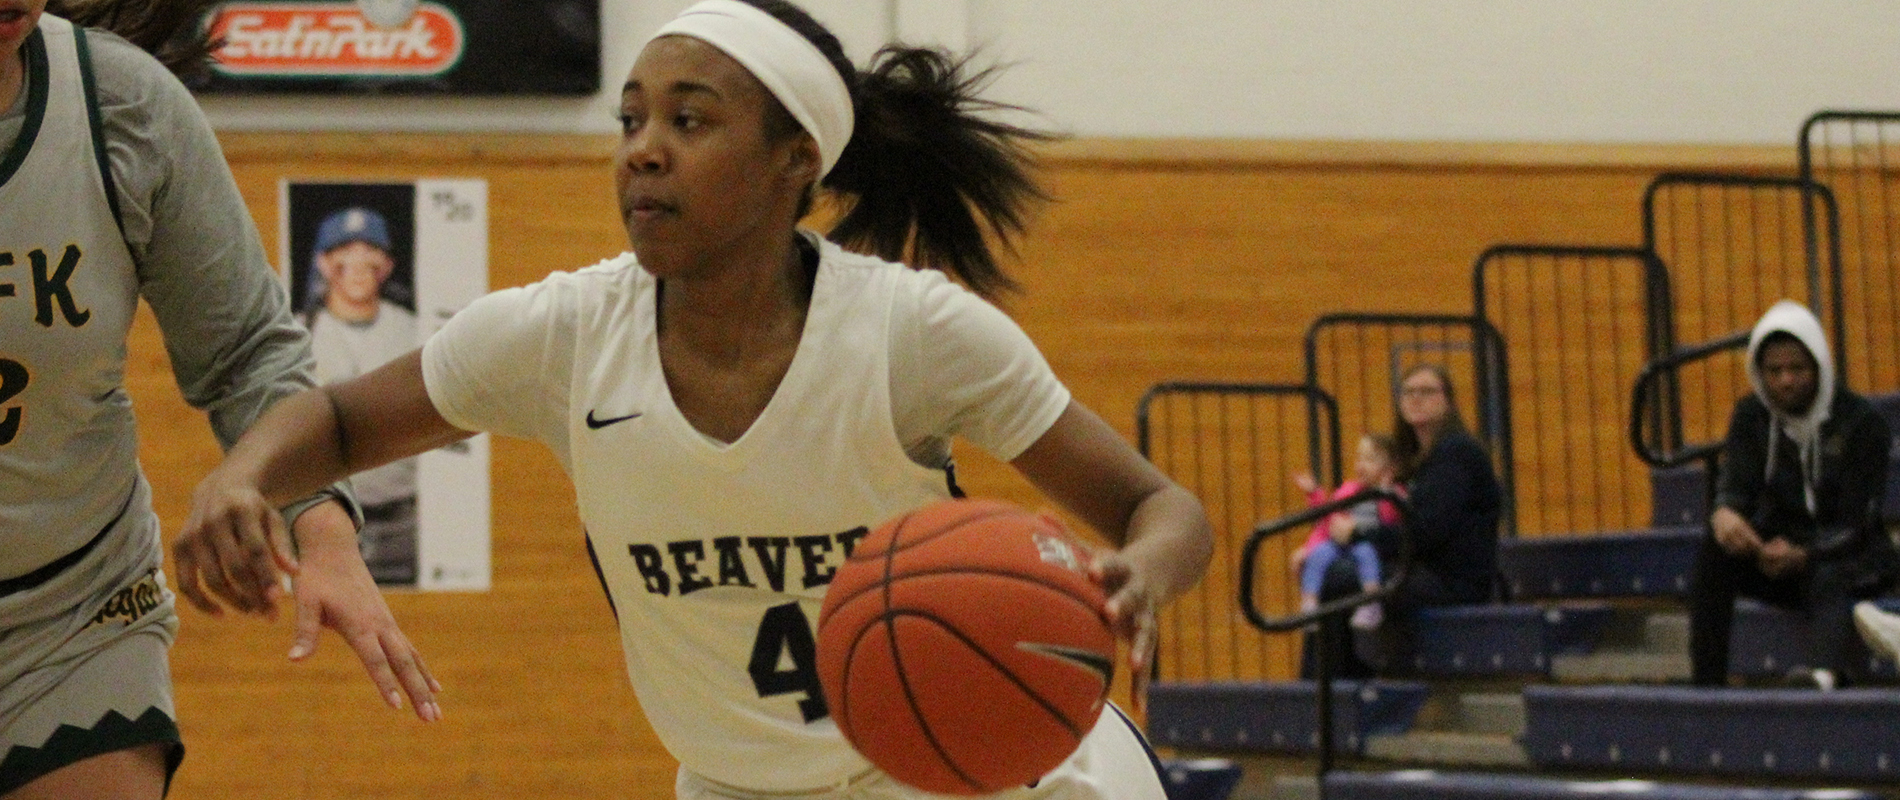 Penn State Beaver's Diamond Thomas reached the 1,000 career point mark the week of Jan. 27th, 2020.